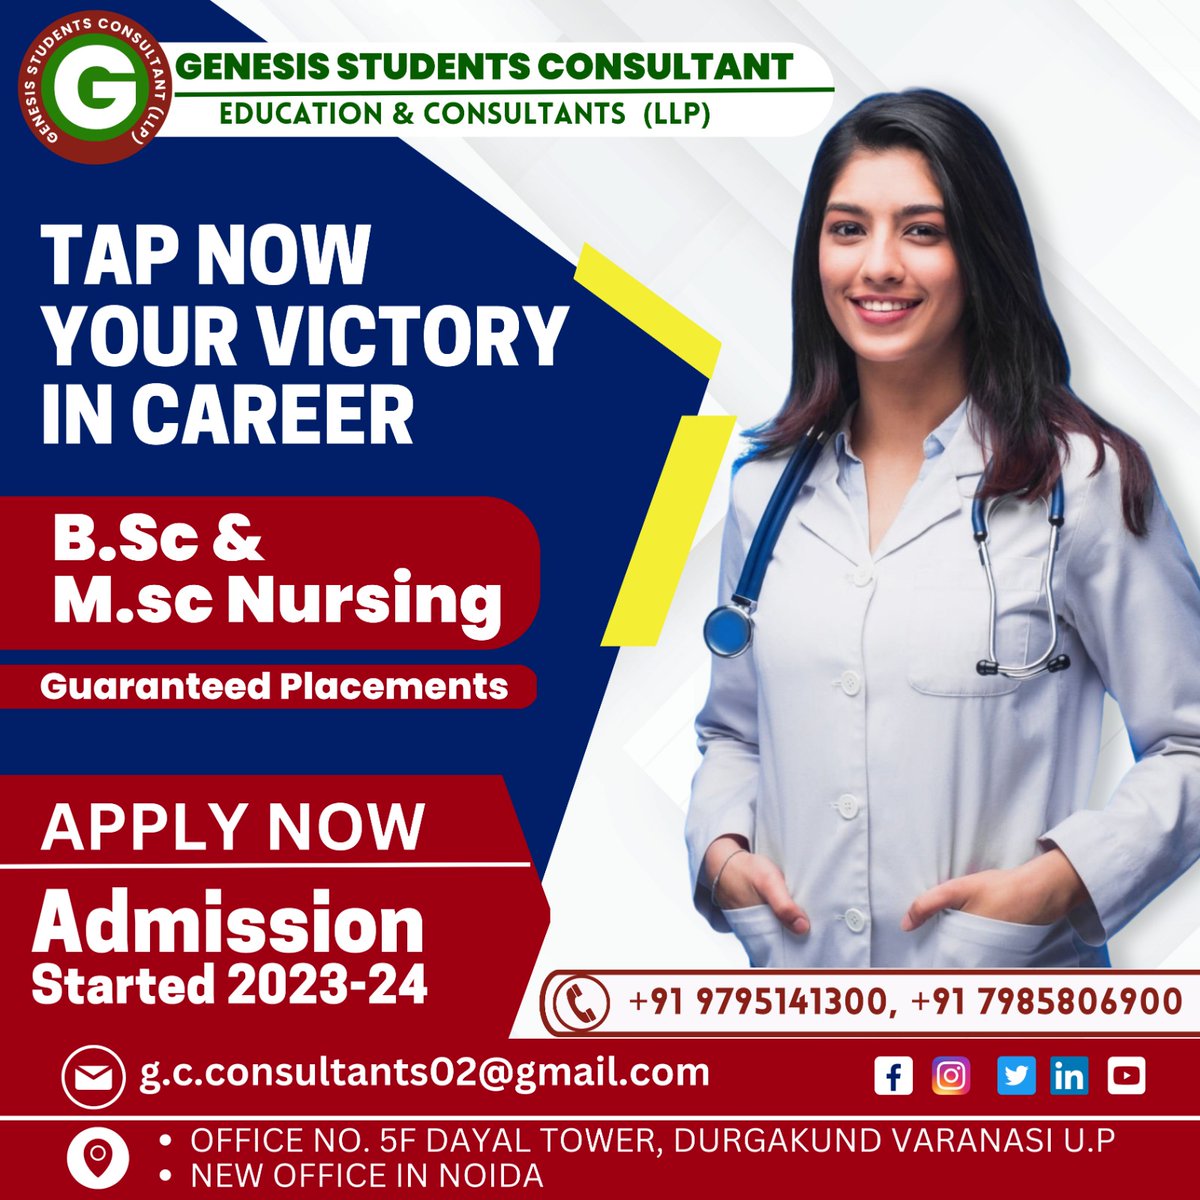 Tap now your victory in career with Genesis Student Consultant.
.
.
#genesisstudentsconsultants #education #careergoals #careeradvice #careerguidance #careerpath #education #MBA #MBAadmissions #pgdmstudents #PGDM2023 #MBAadmissions
#education #varanasi